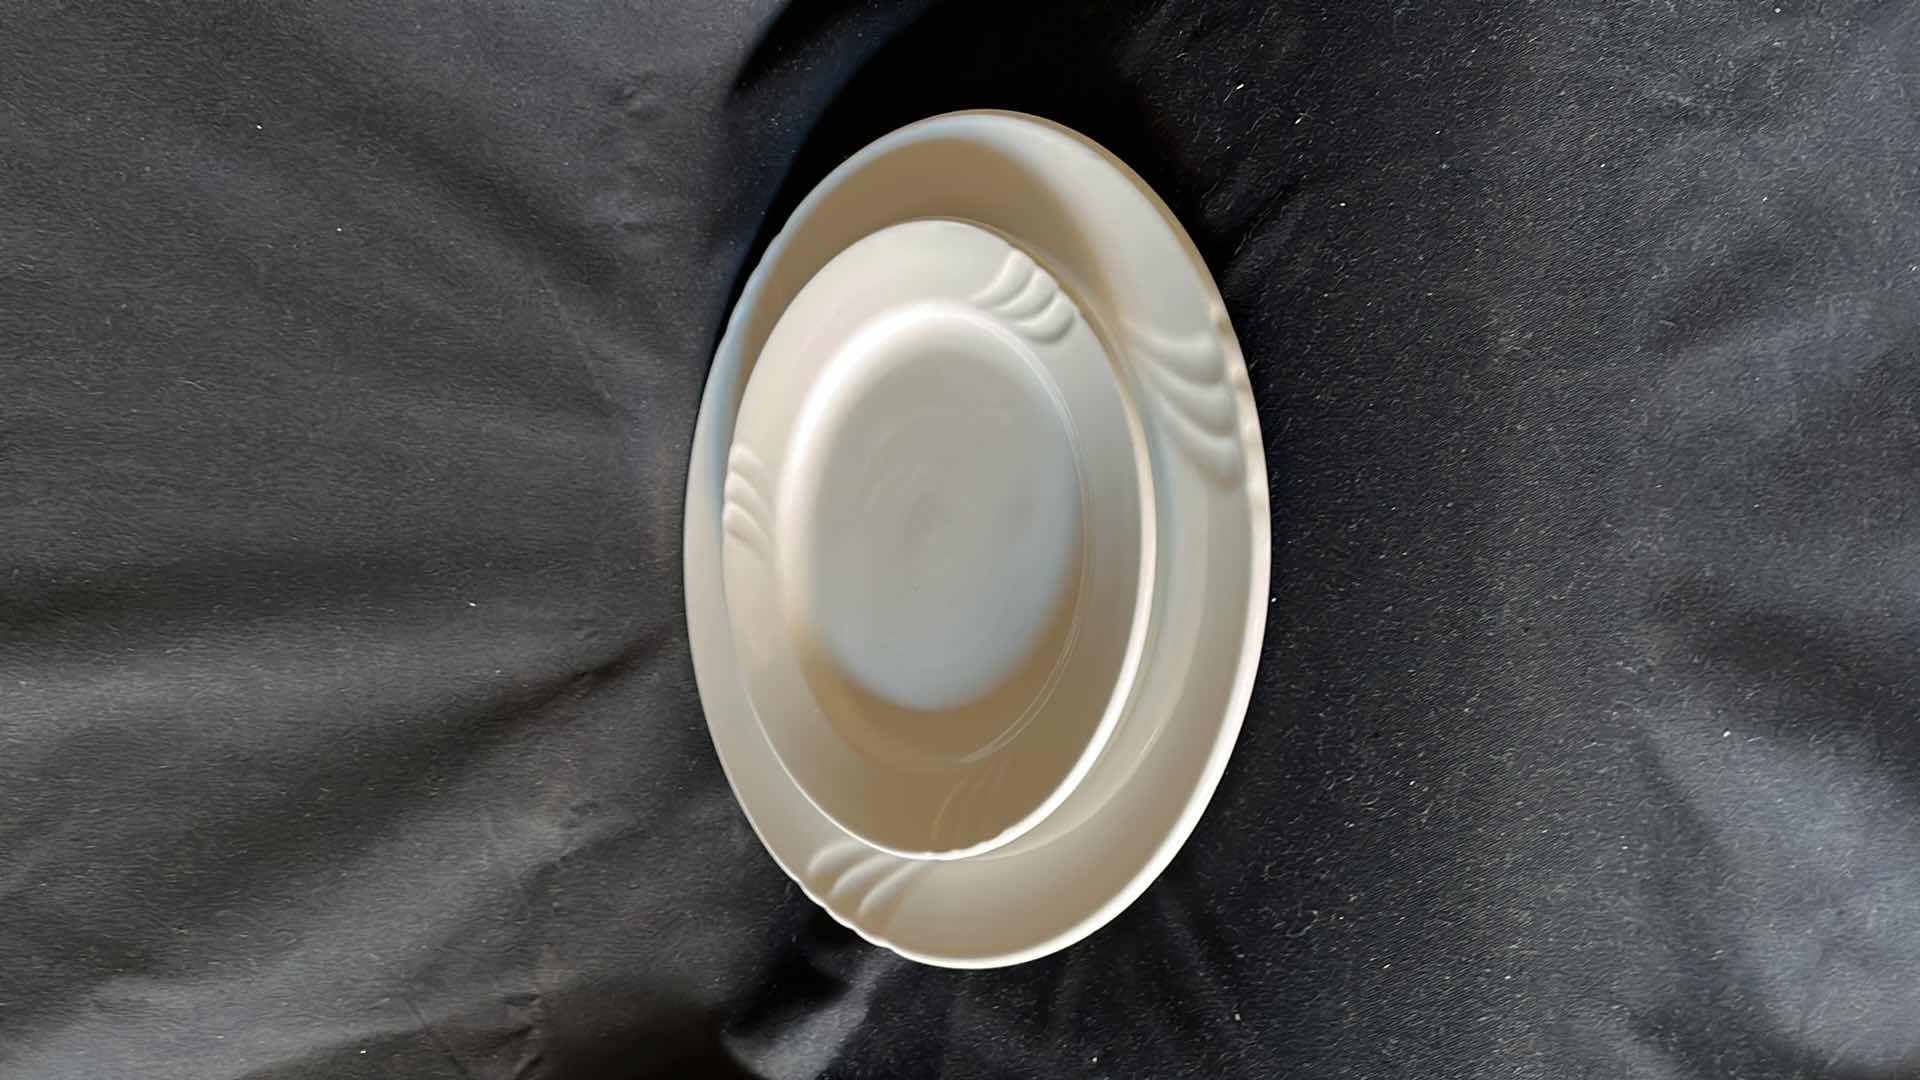 Photo 3 of BRIANA REGO FINE PORCELAIN DINNER PLATES AND SALAD PLATES (SETS OF 4)